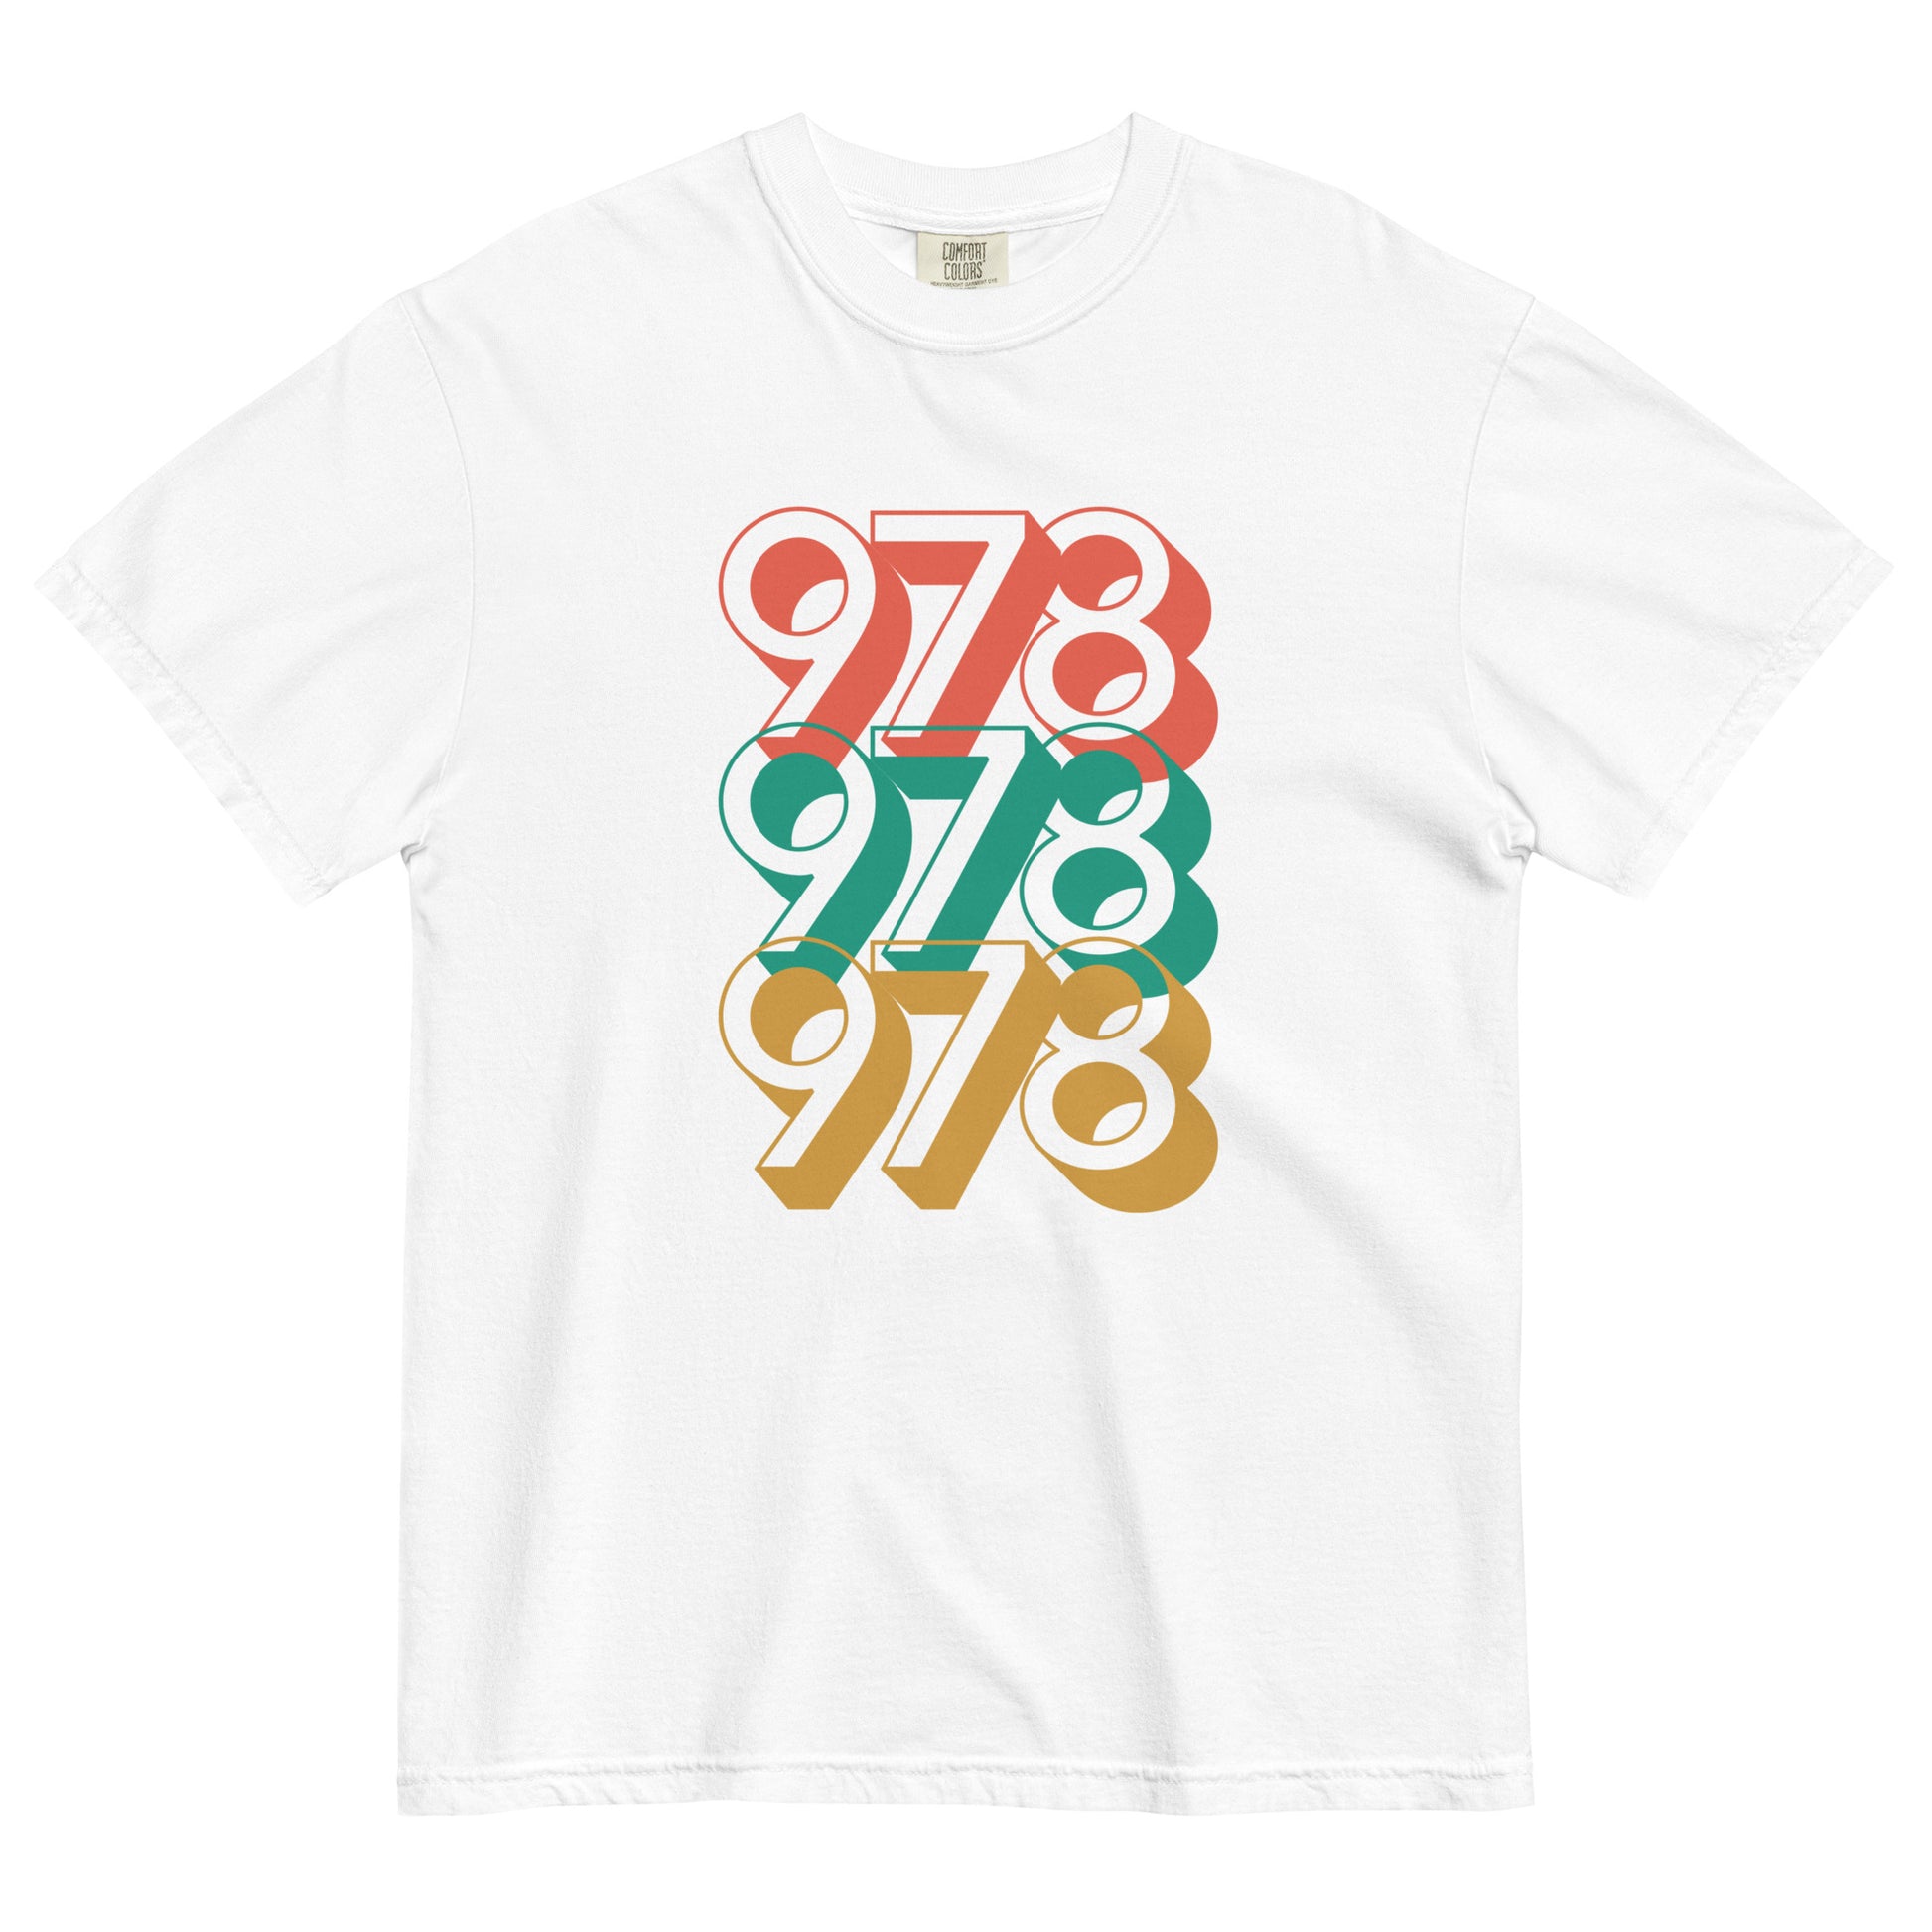 white tshirt with three 978s in red green and yellow